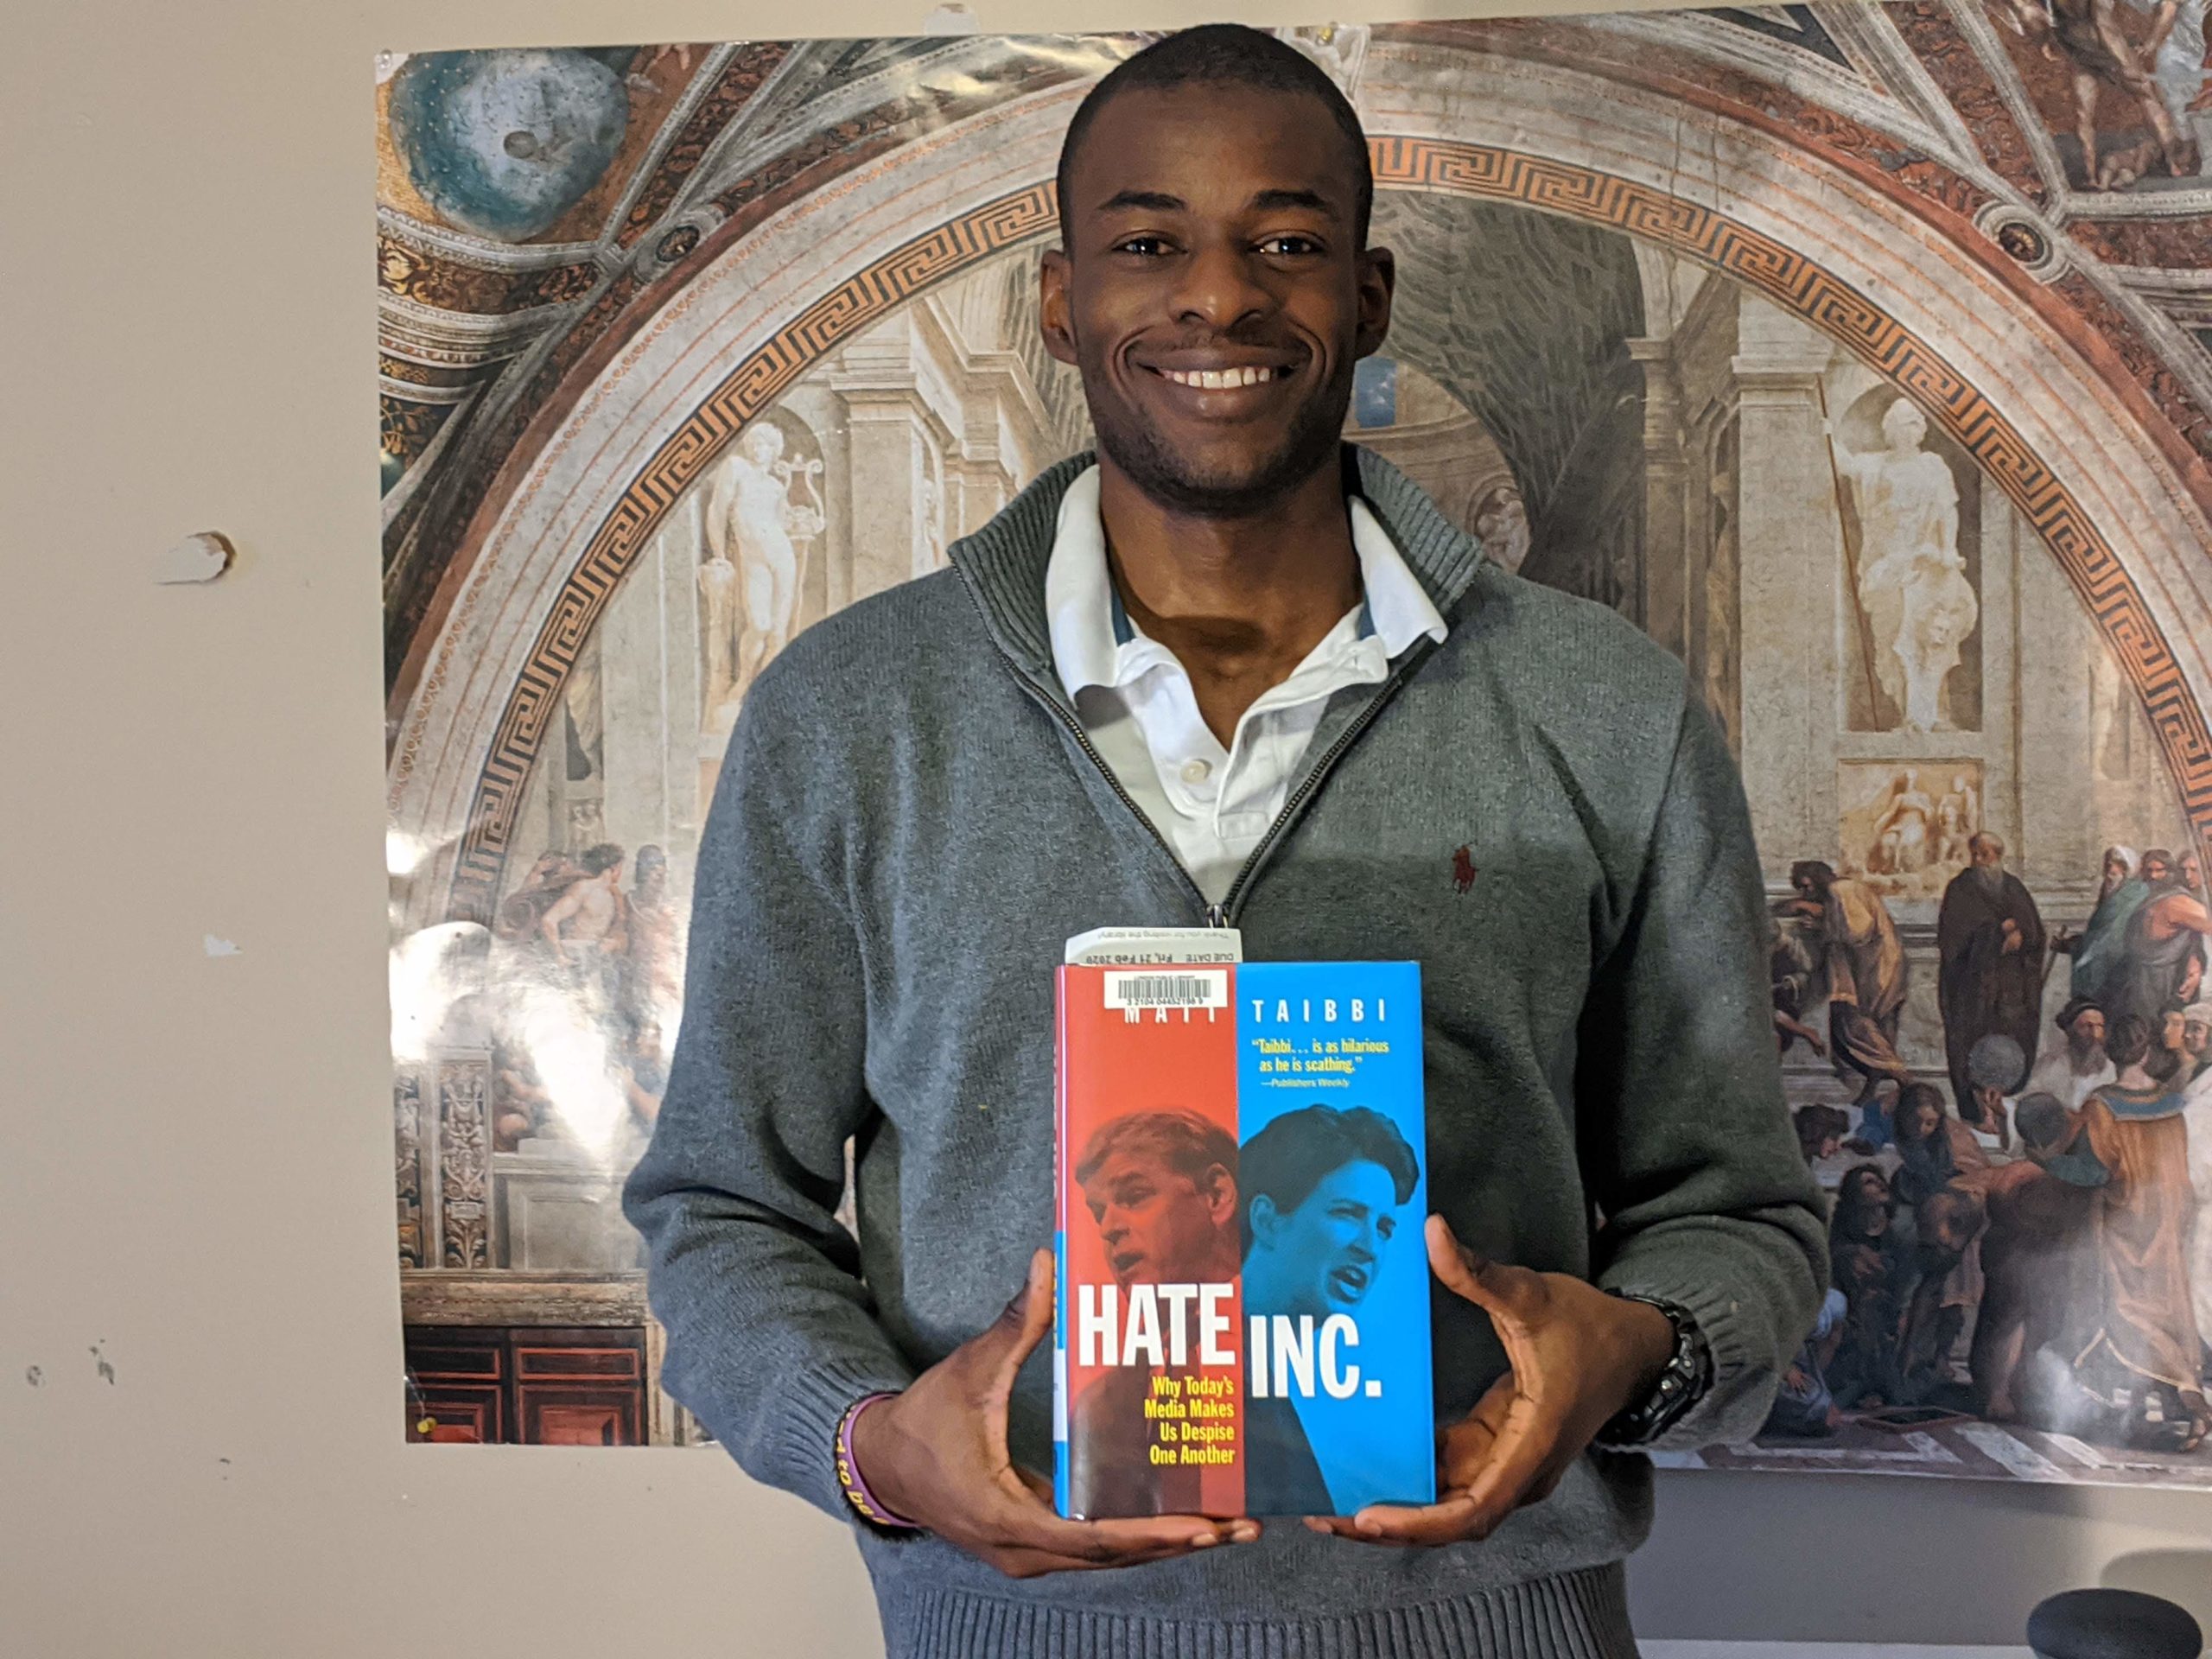 Hate Inc. Book Notes: Political Media’s Business Model involves Manipulating your Emotions